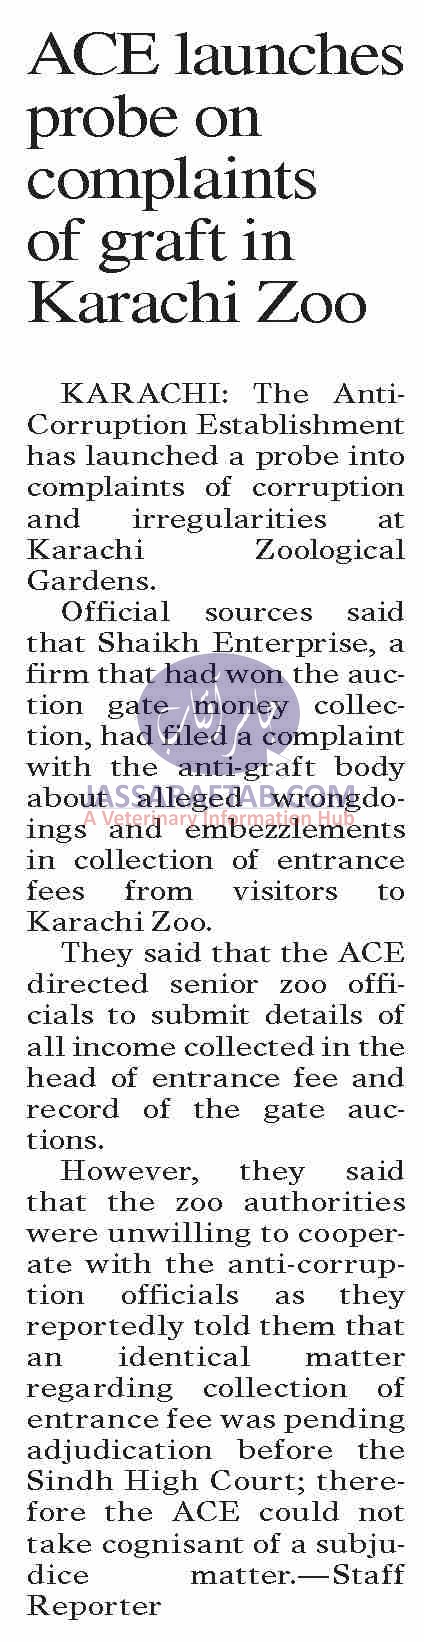 ACE launched a probe into complaints of corruption and irregularities at Karachi Zoo